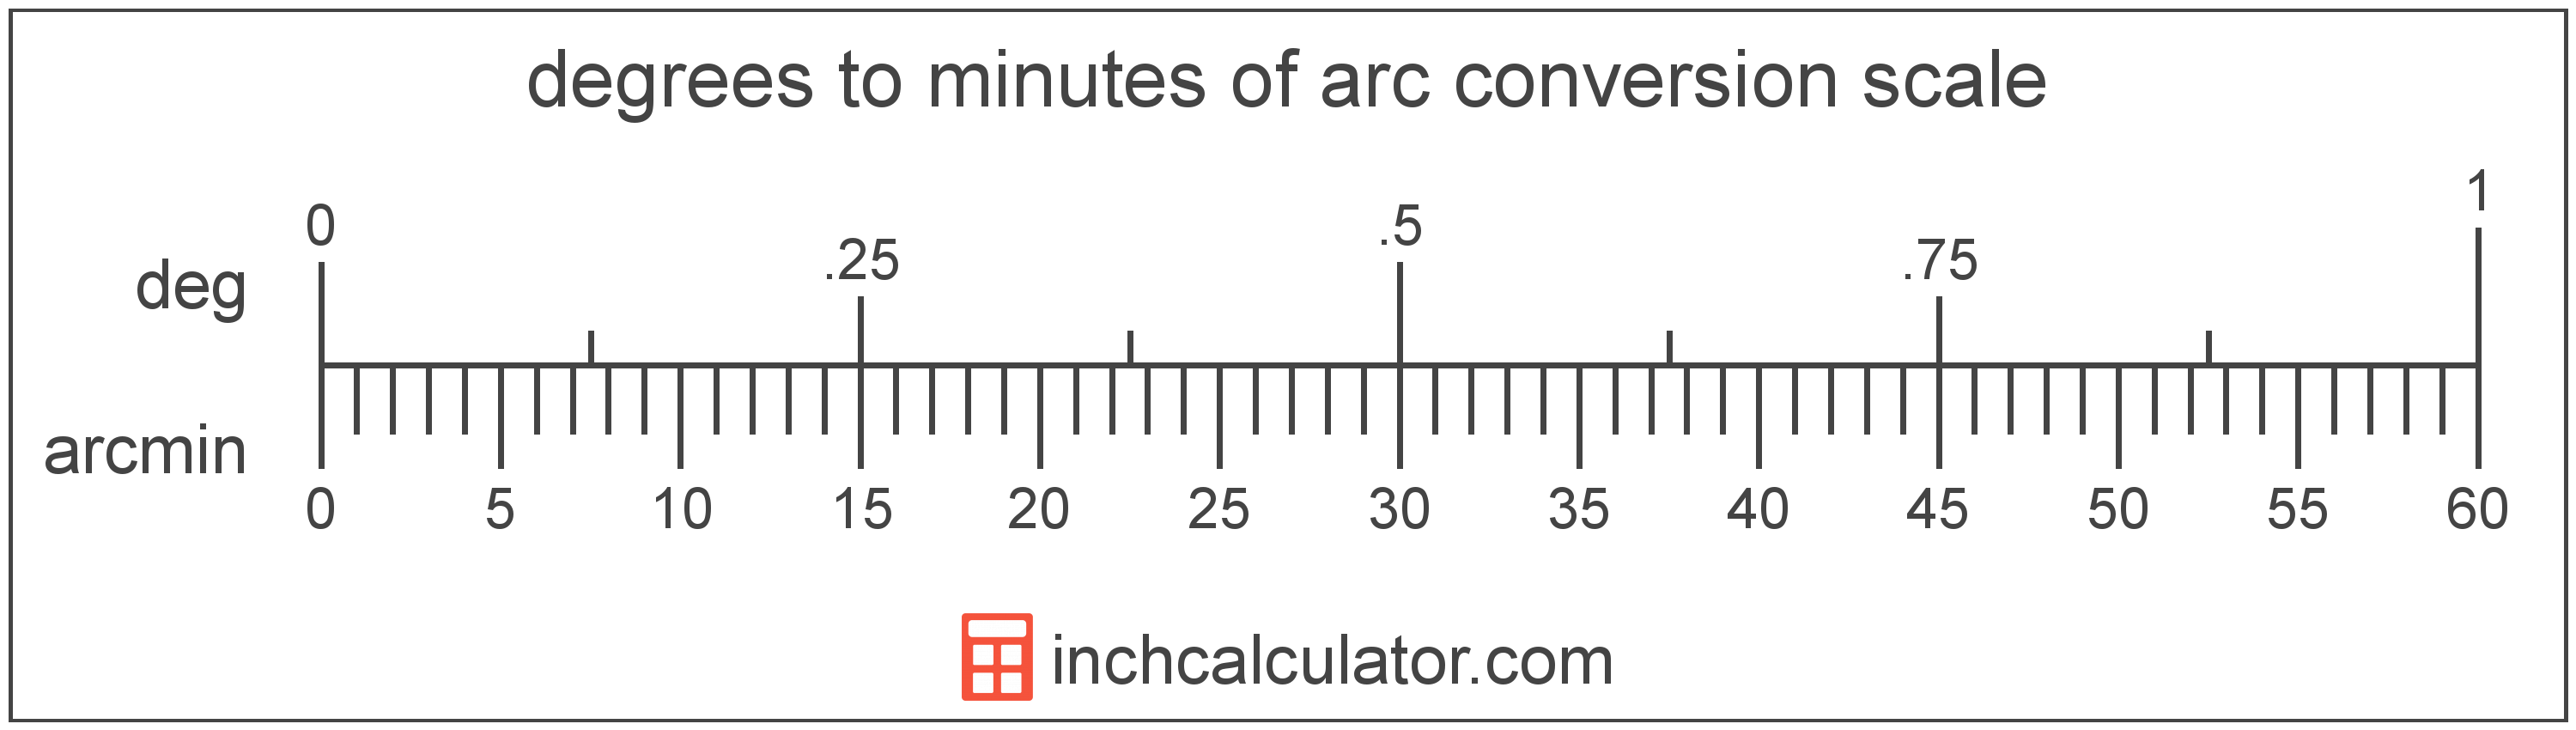 conversion scale showing degrees and equivalent minutes of arc angle values